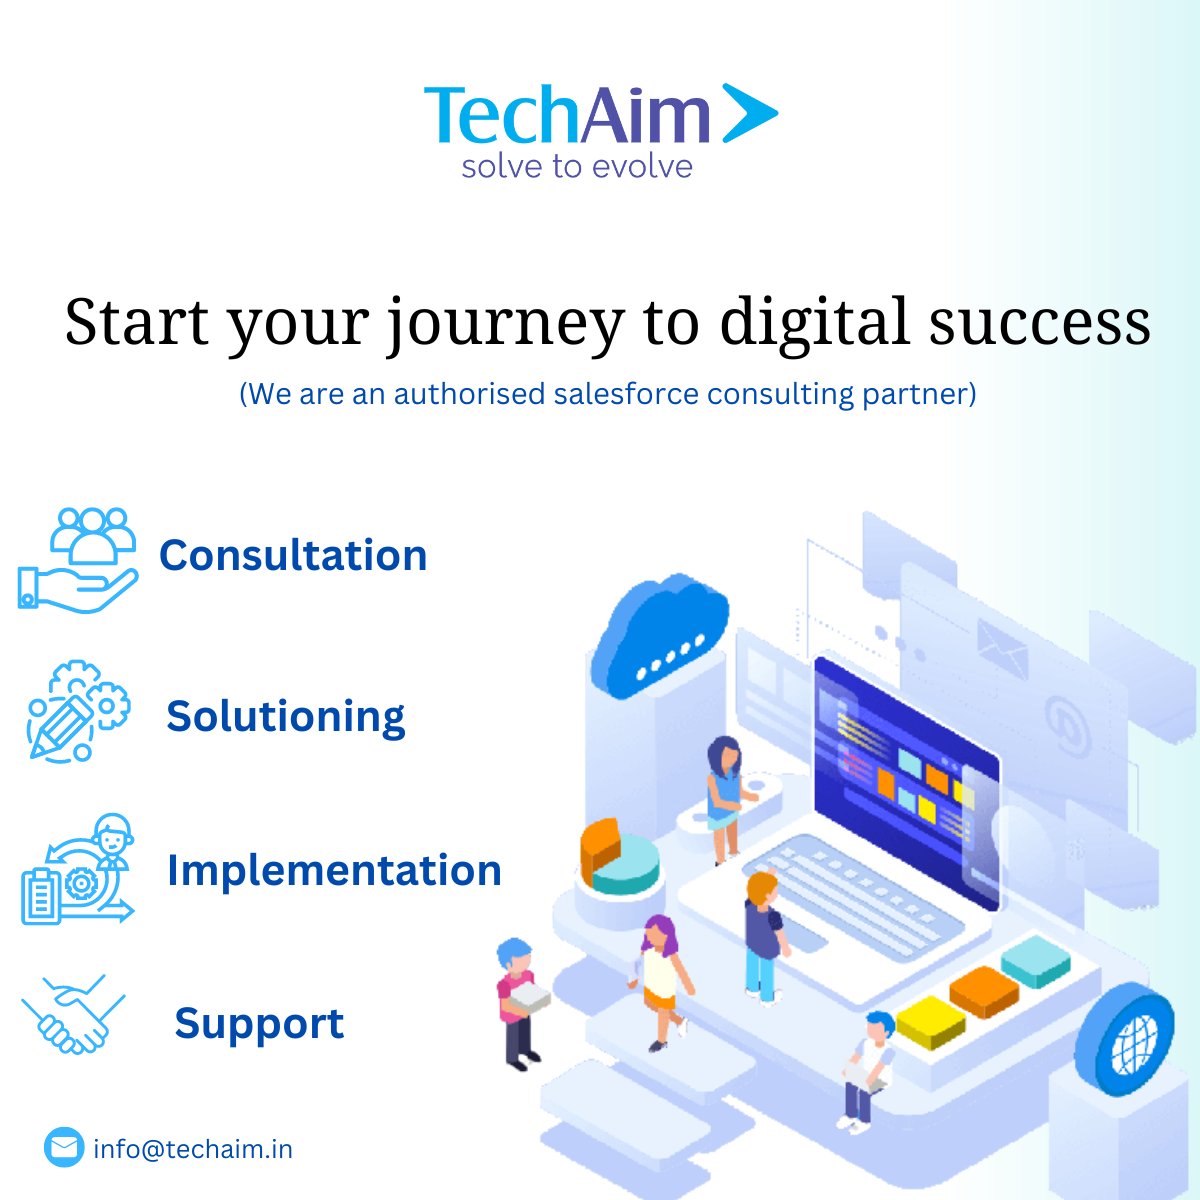 Start your journey to digital success with techaim.
#techaim #salesforce #consulting #services #businessgrowth #support